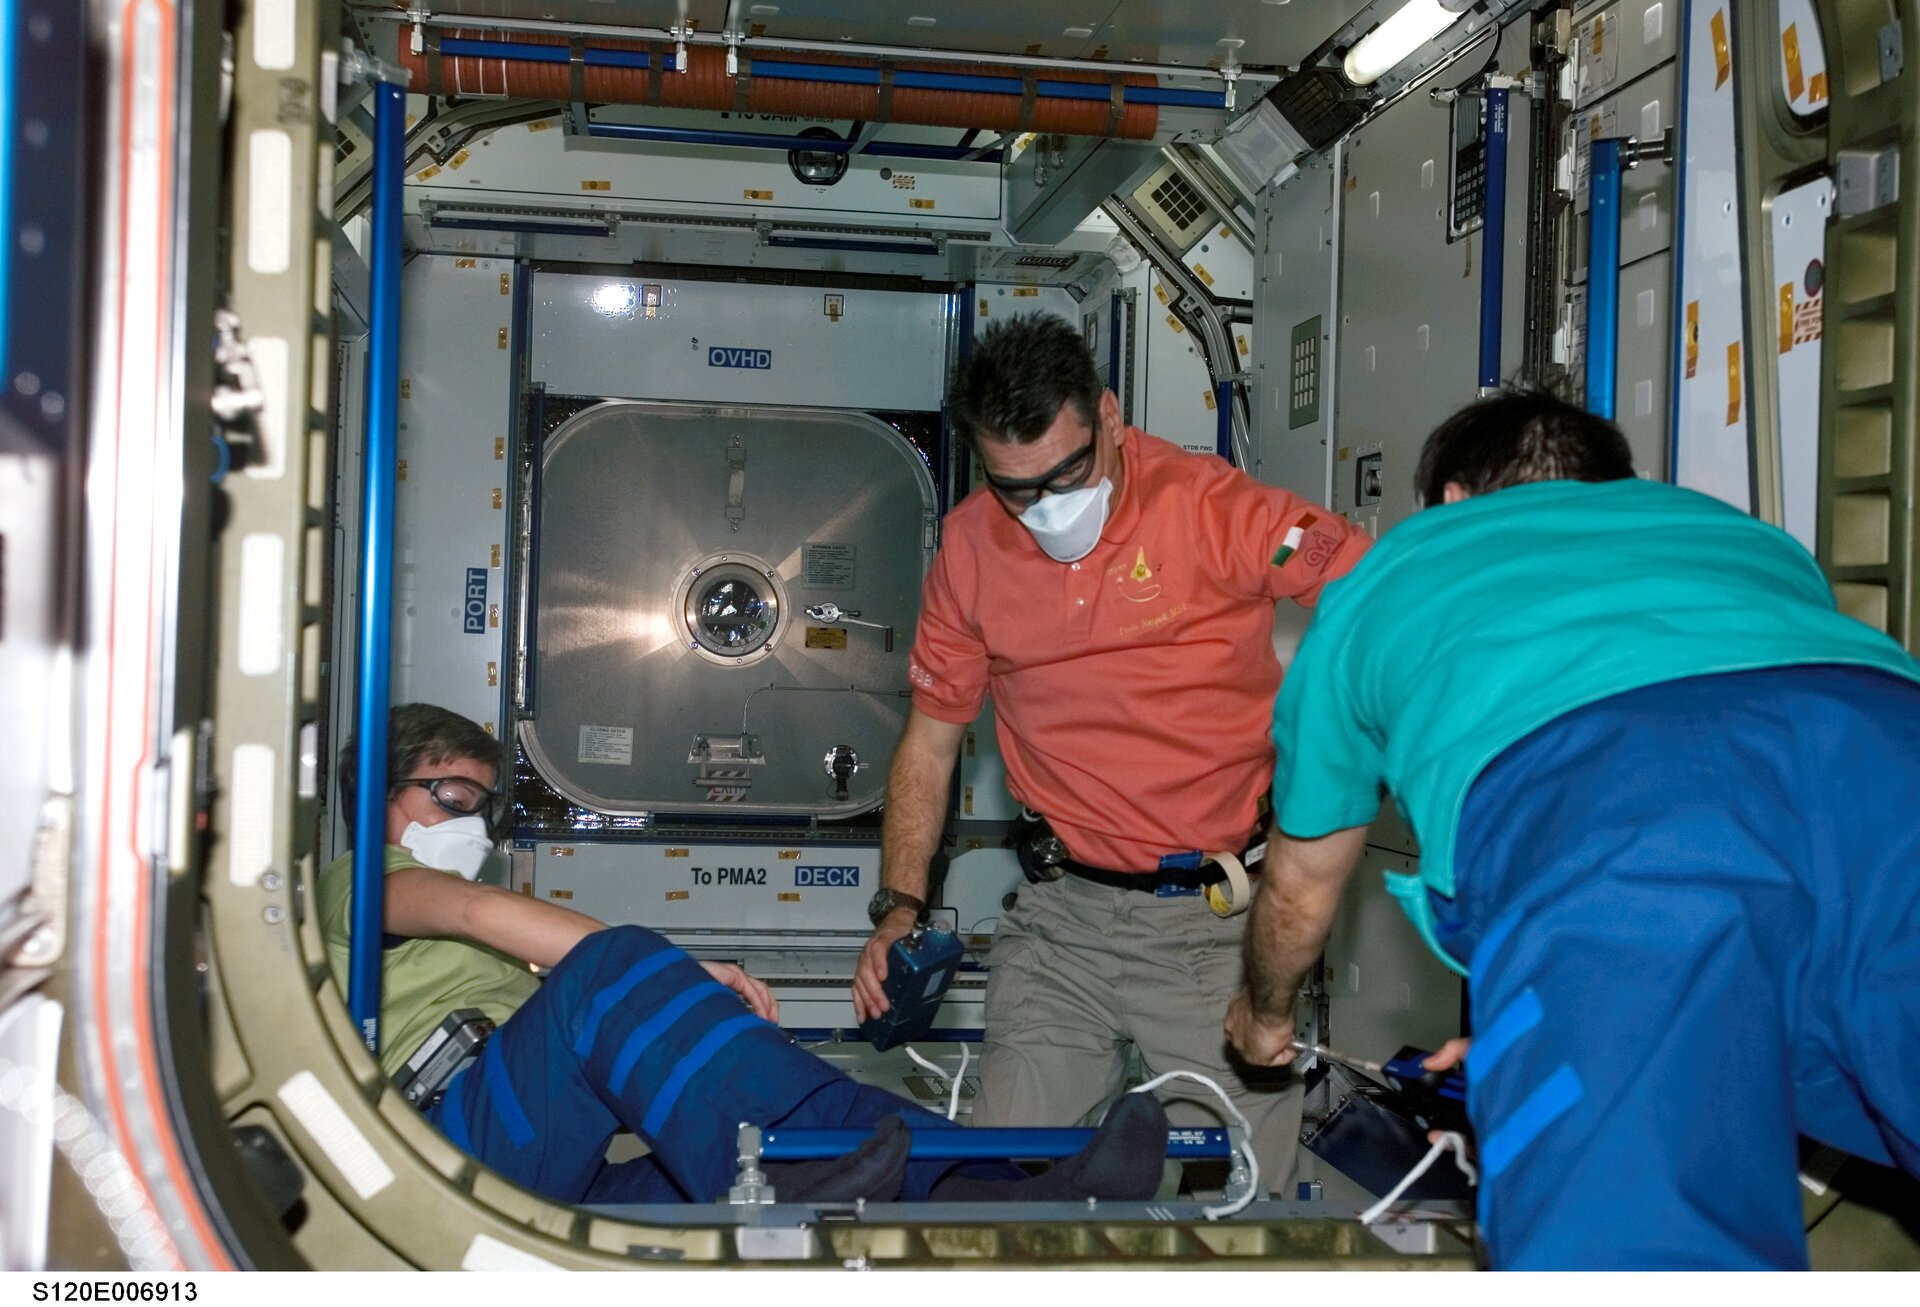 Nespoli and Whitson wore protective goggles and face masks to protect themselves in case of any loose flying objects inside